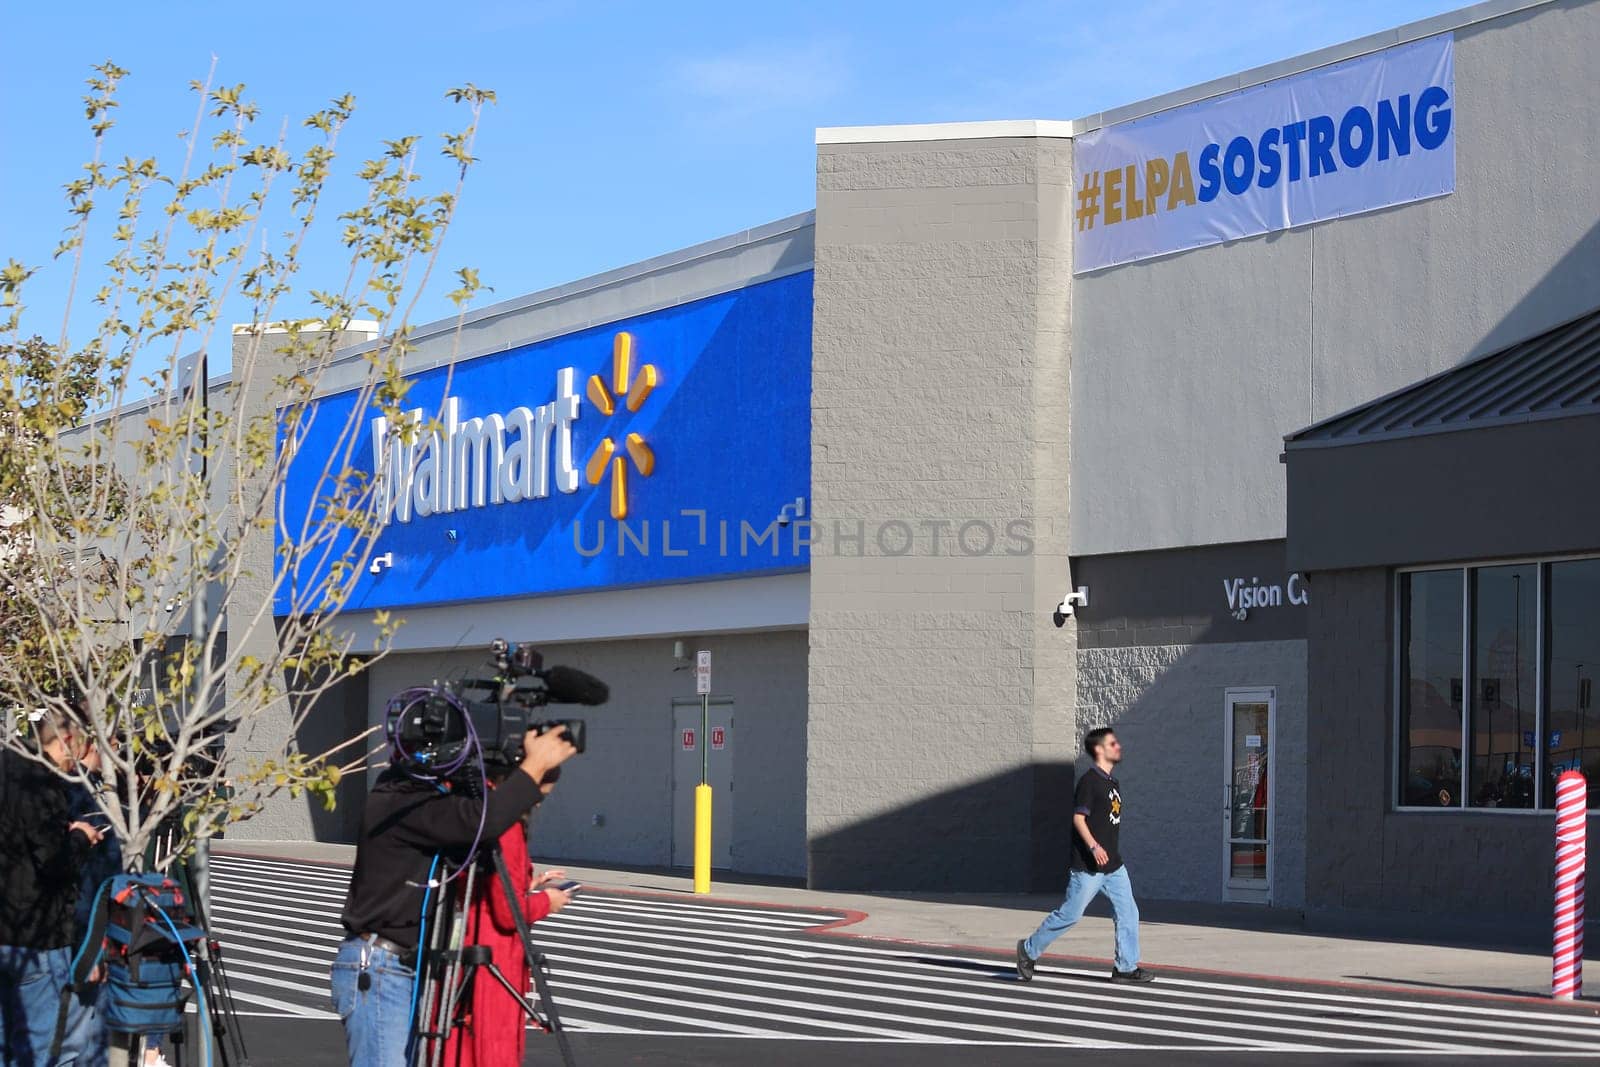 El Paso, Texas USA - November 14, 2019 The Cielo Vista Walmart where 22 people were gunned down and more than two dozen were seriously injured August 3, re-opened November 14th, 2019 at 9 AM.